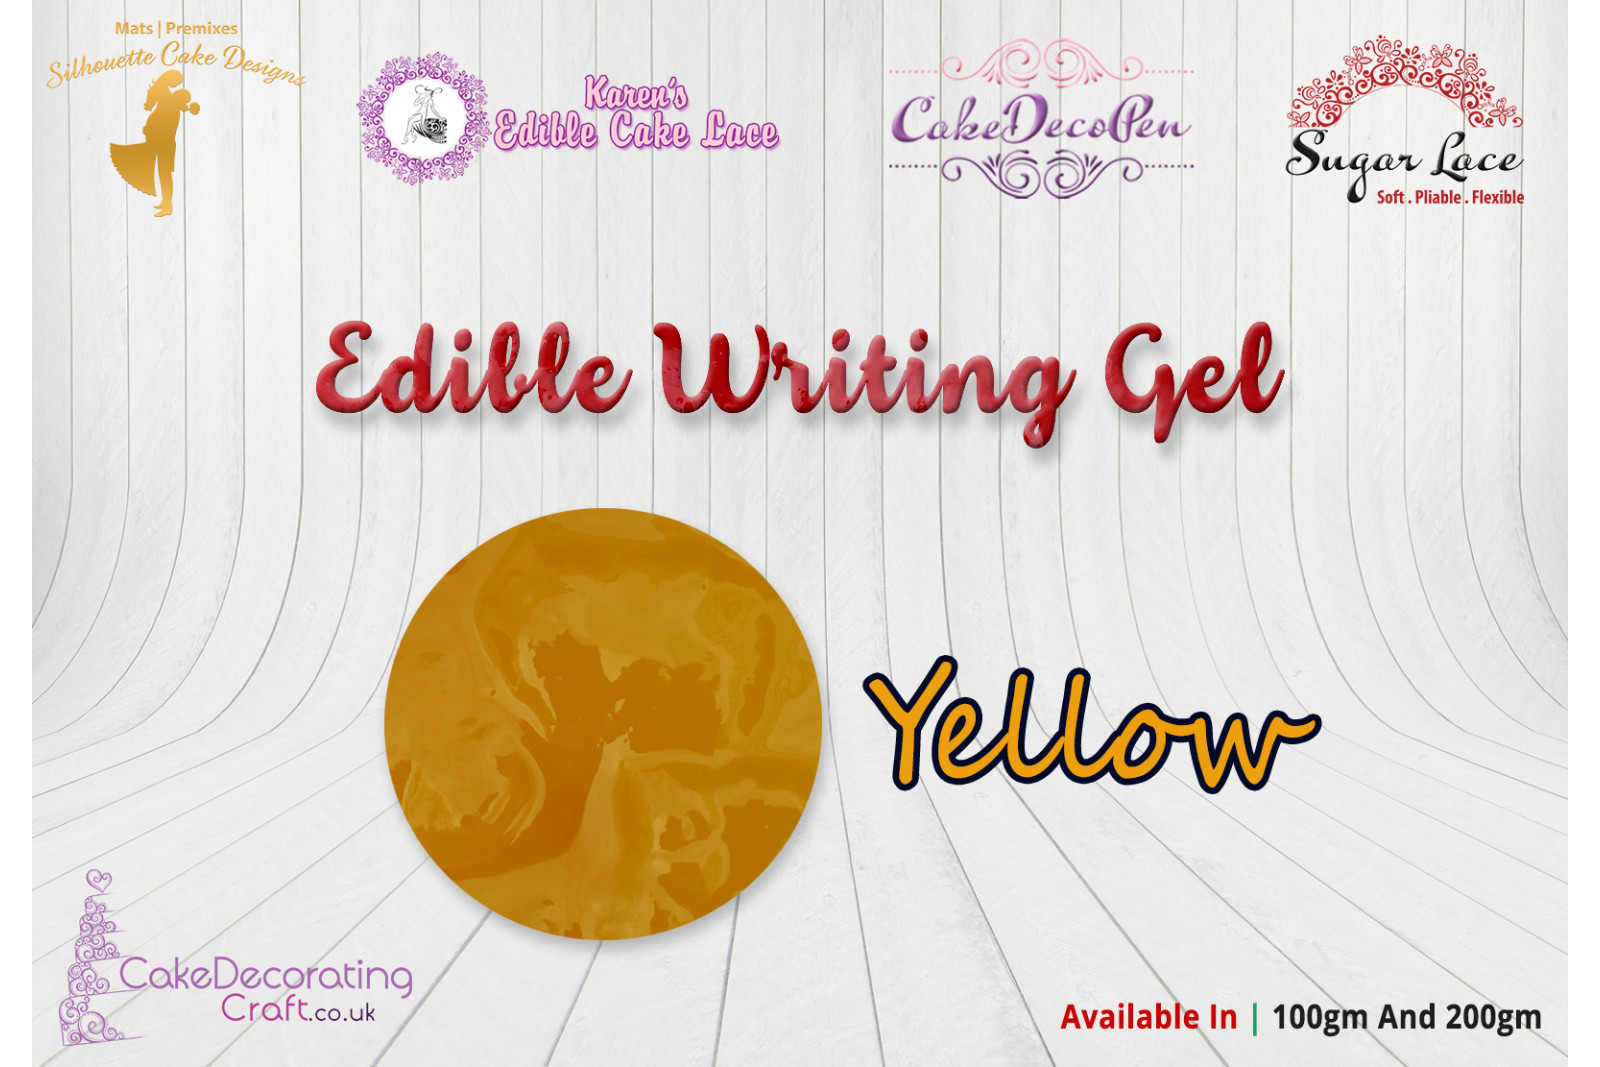 Cake Decorating Craft | Piping And Writing Gel | Yellow With Silver Sparkle